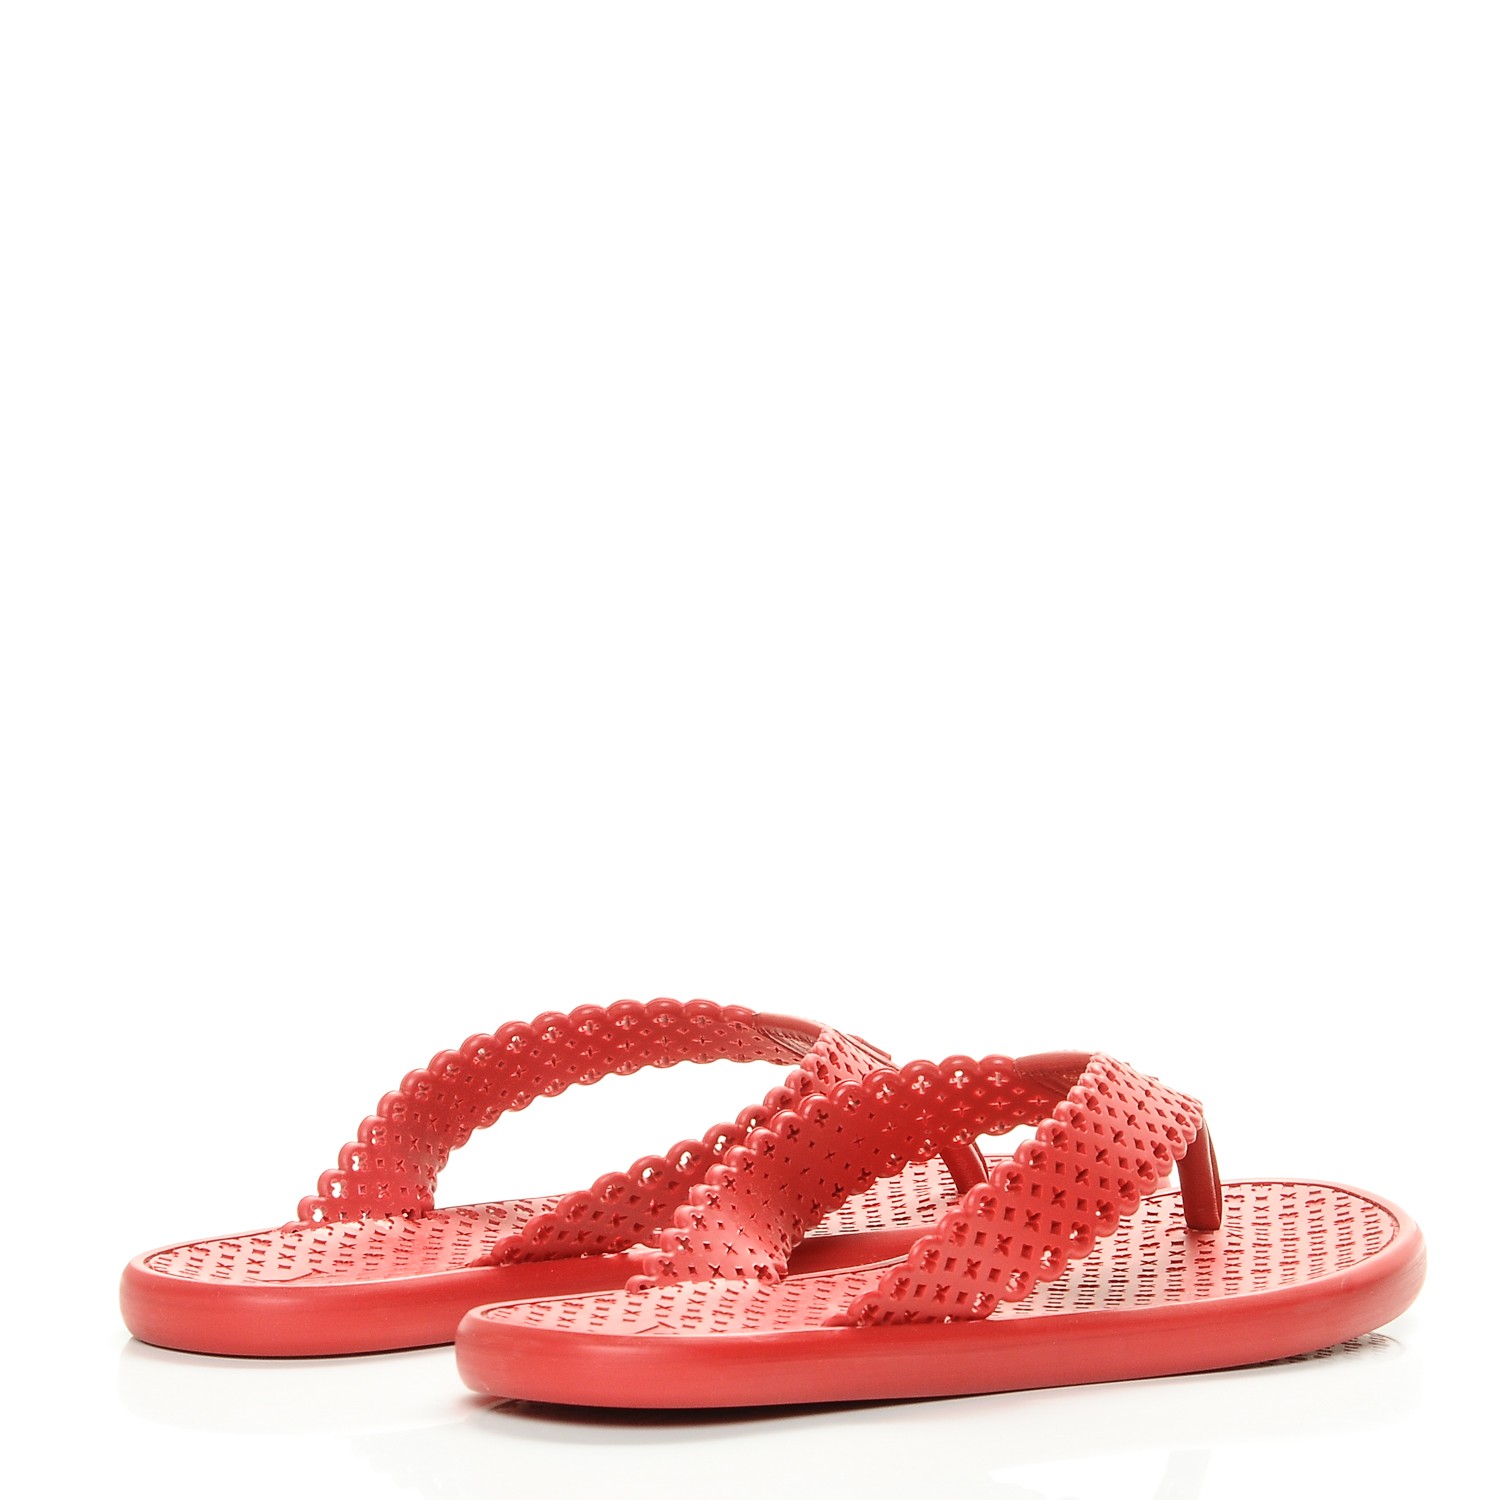 LOUIS VUITTON Rubber Tatoo Thong Sandals 37 Red 197612